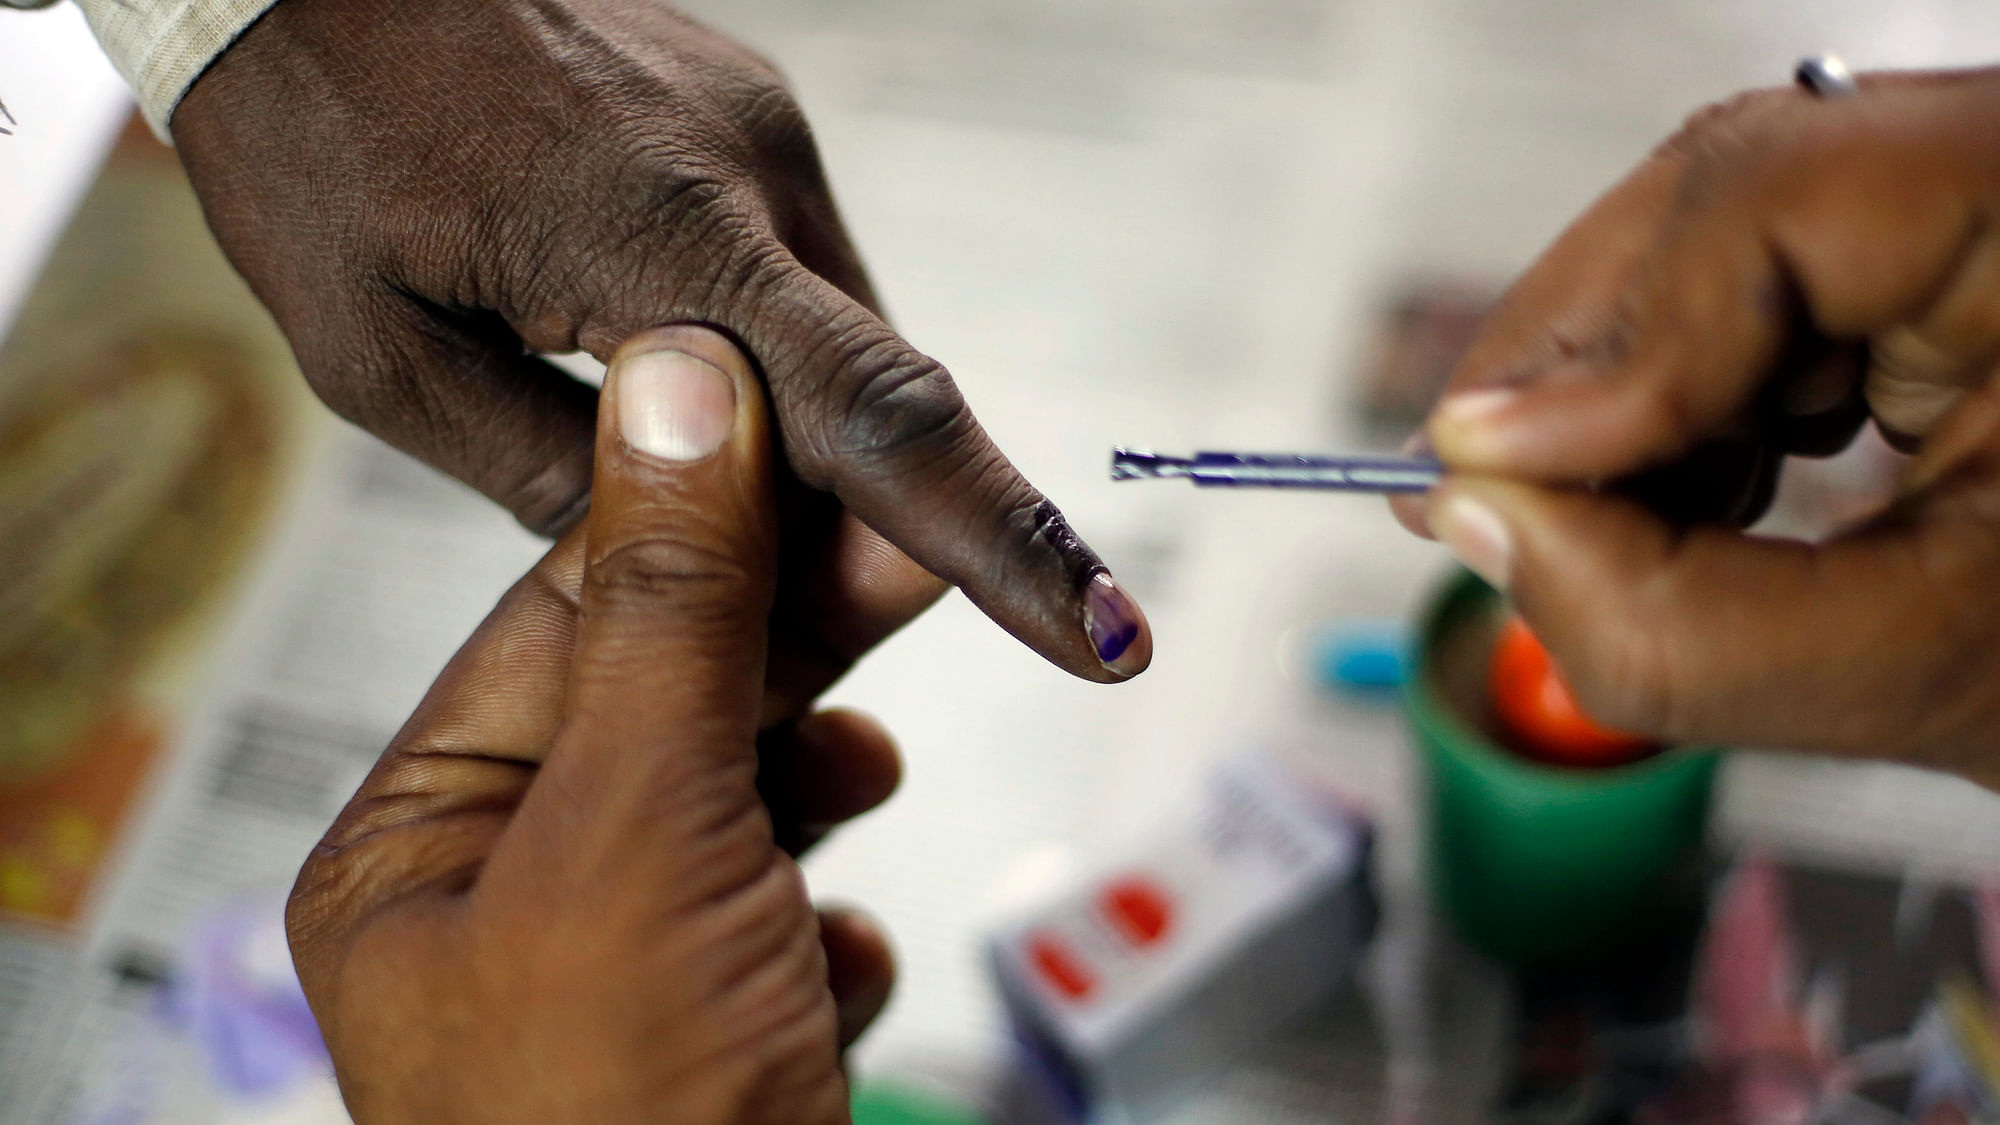 A man gets inked after casting vote. Image used for representation.